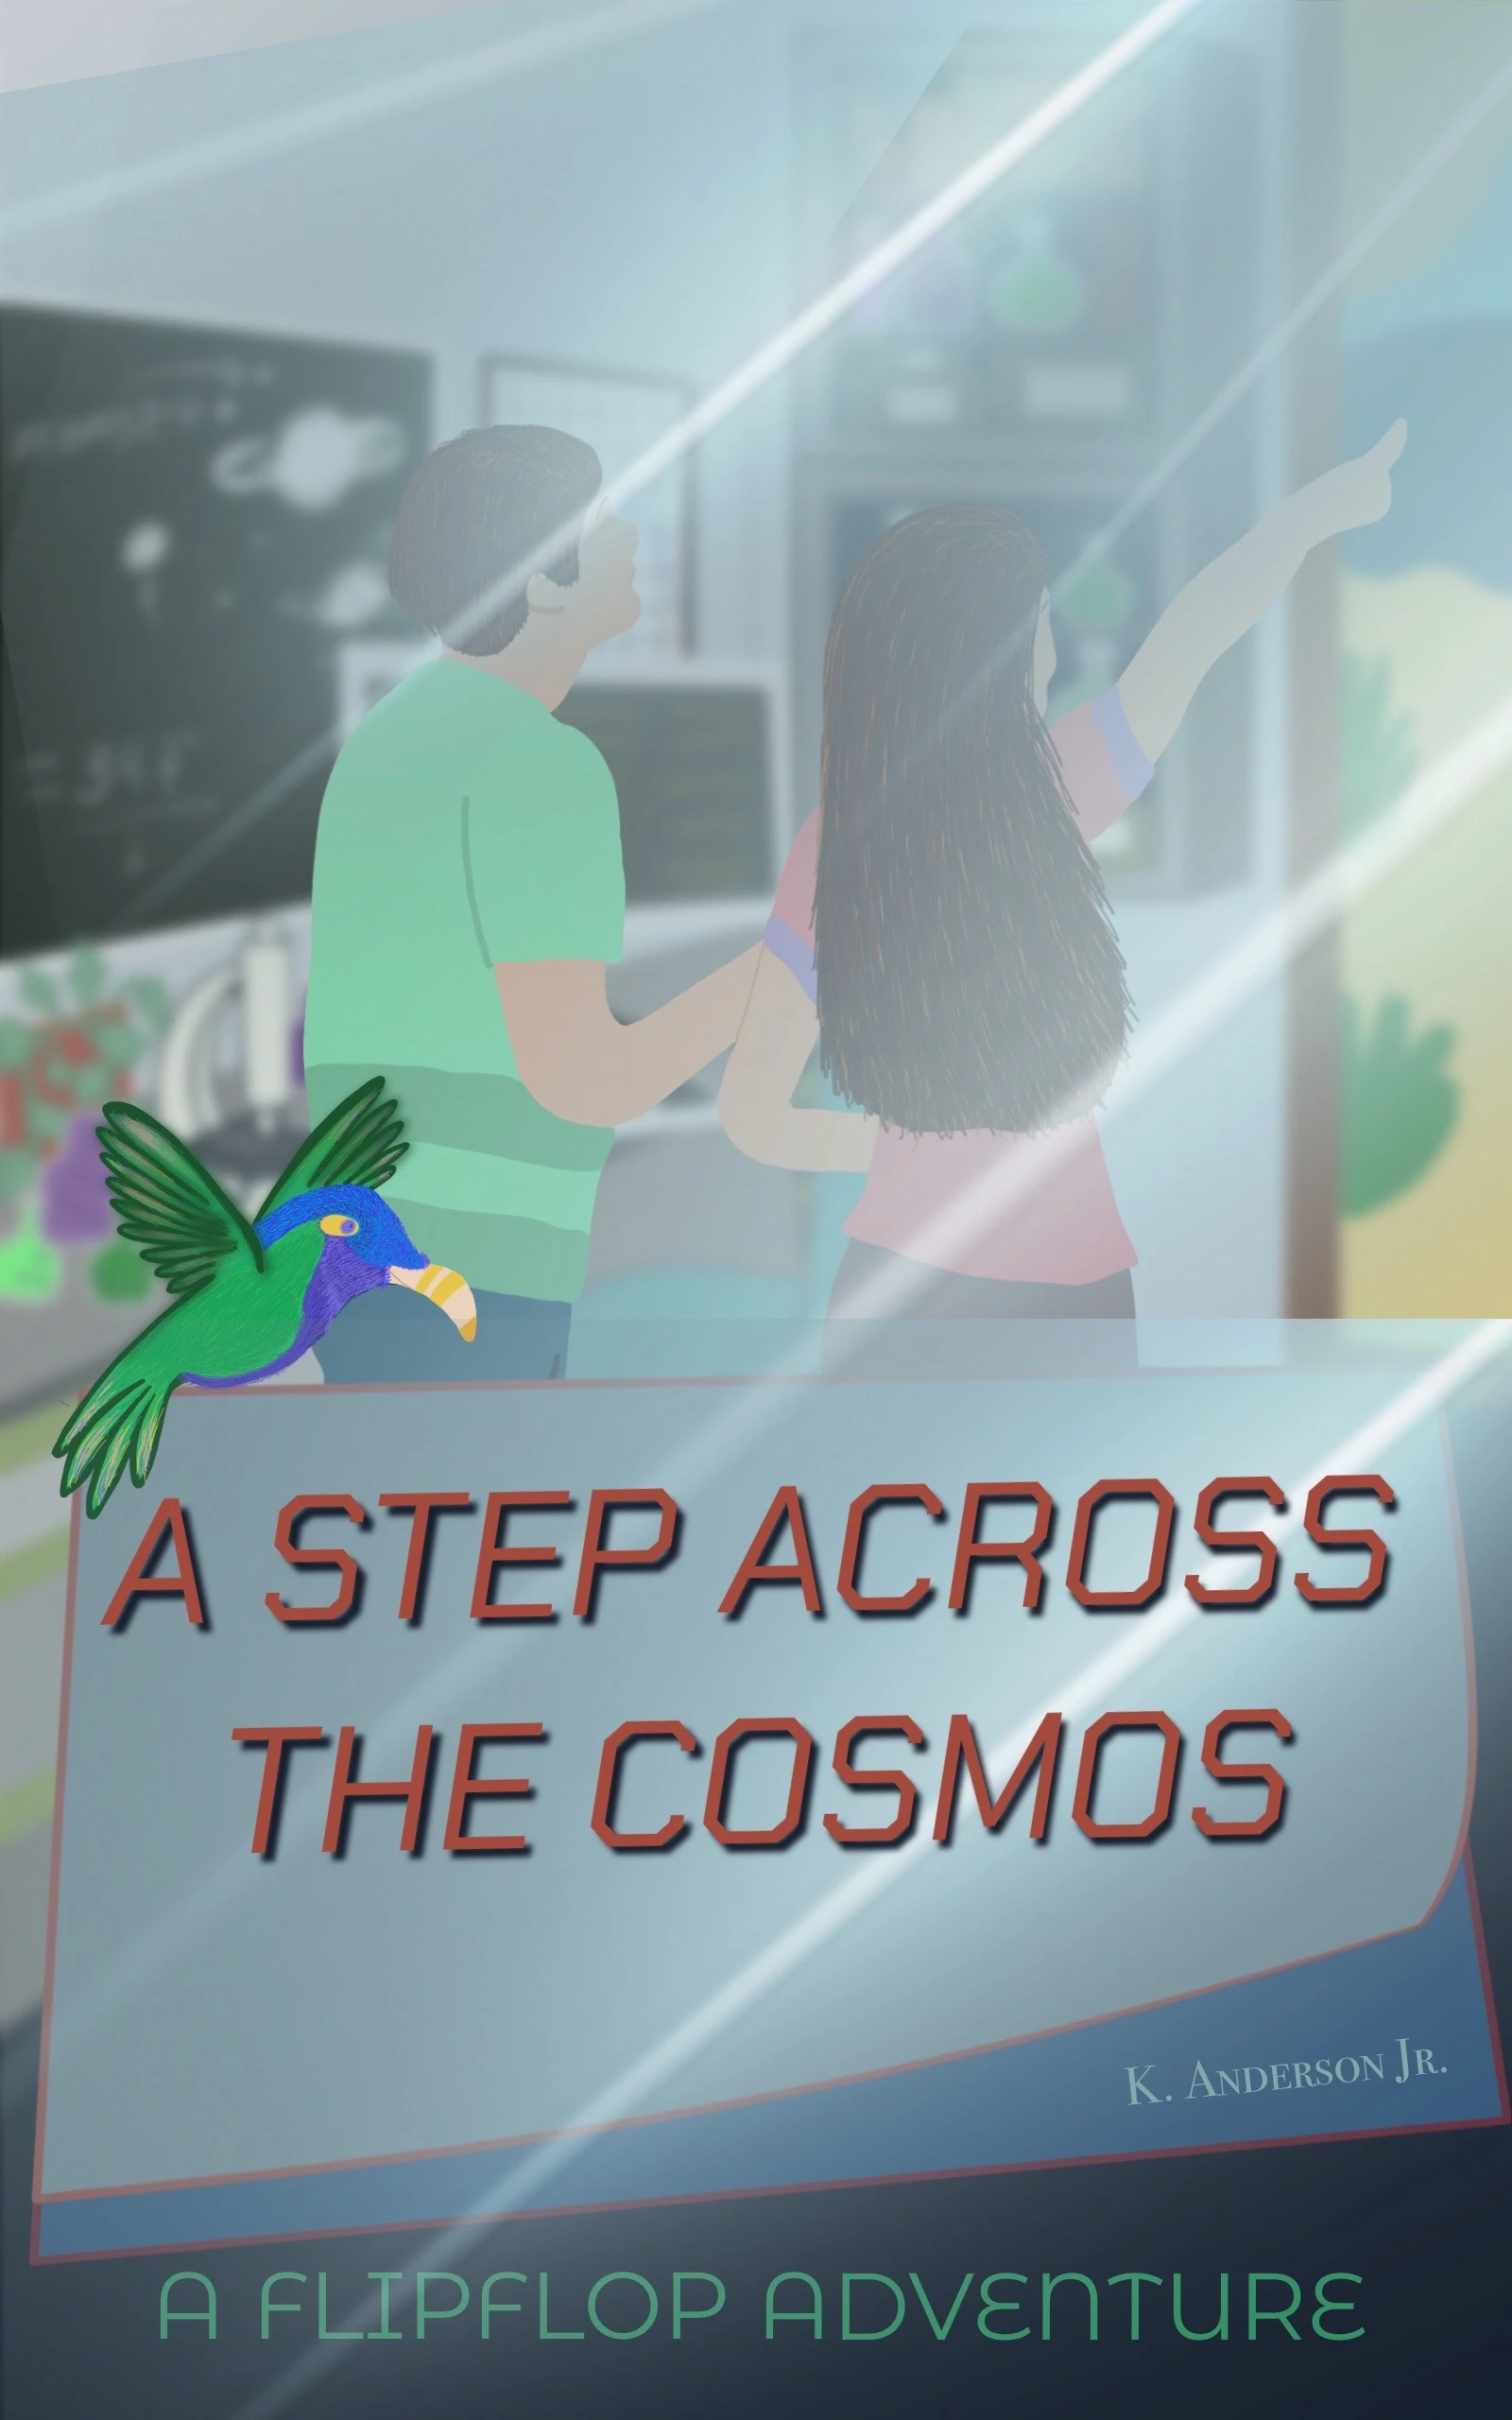 A Step Across the Cosmos